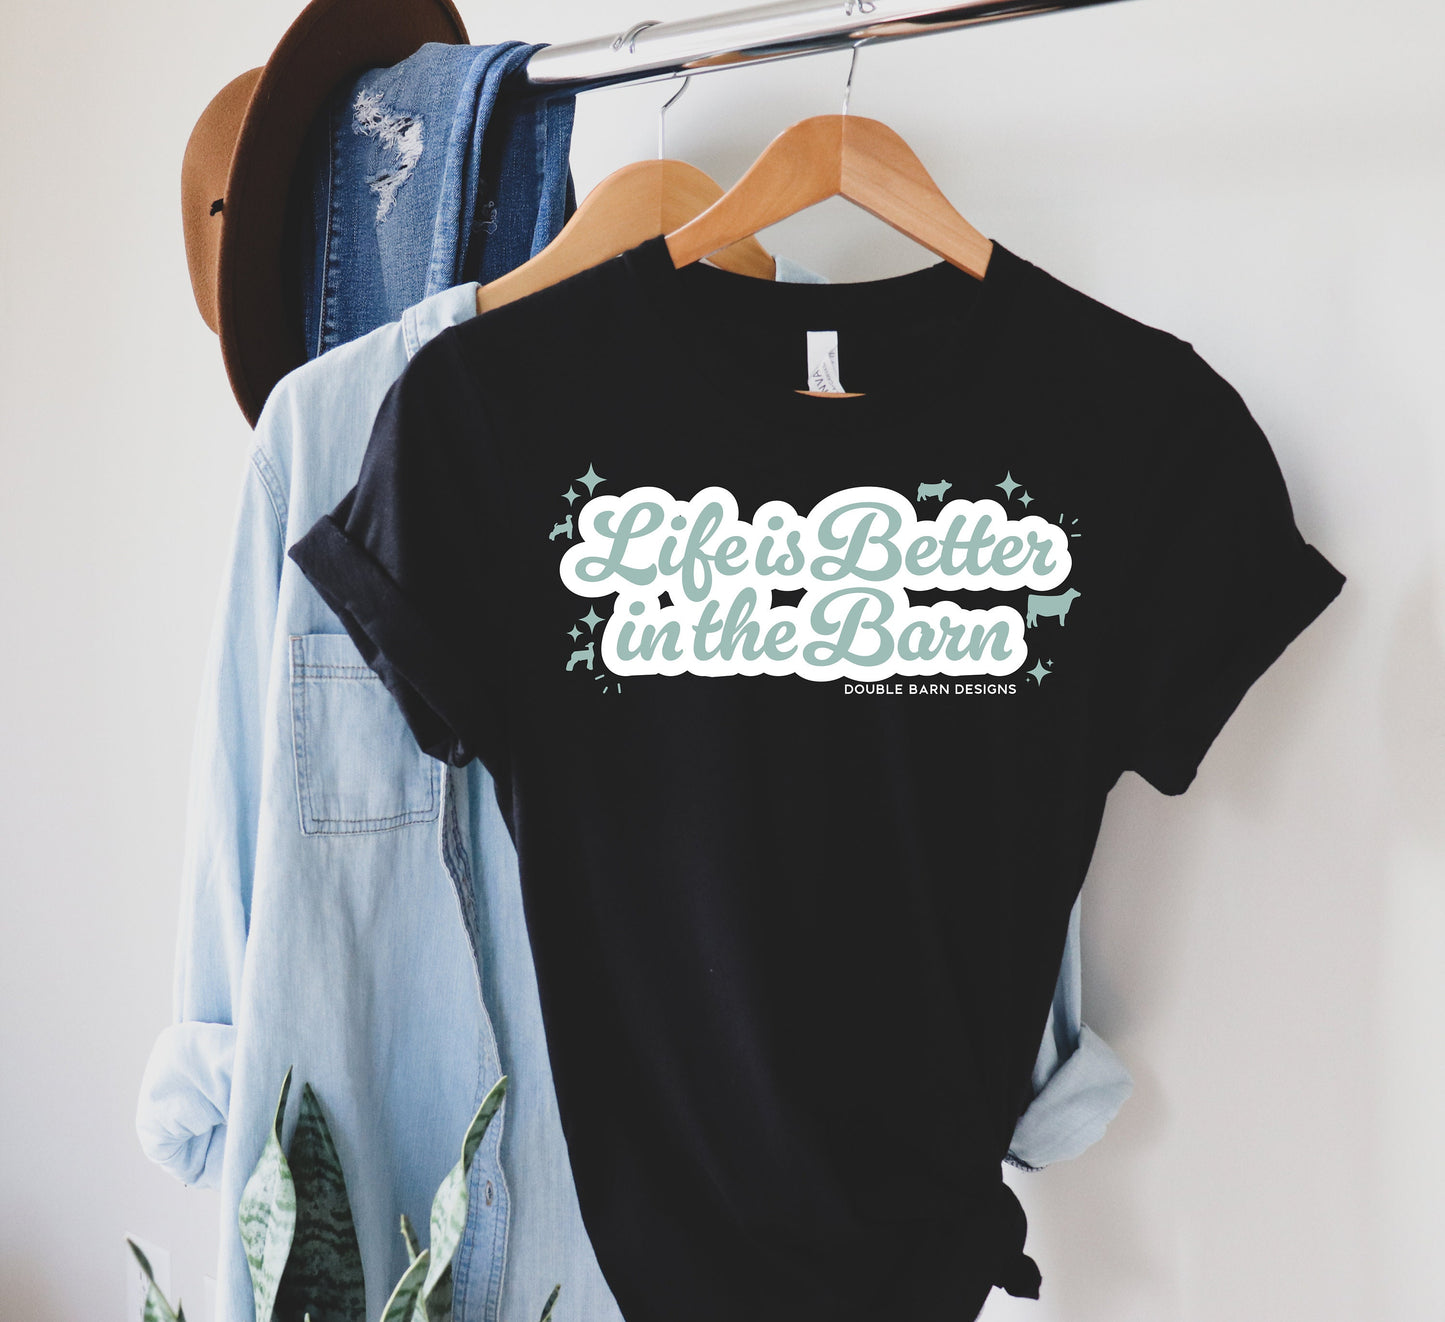 Stock Show Tee Shirt Sublimation Design | Life is Better in the Barn - PNG Files Included | Commercial Use